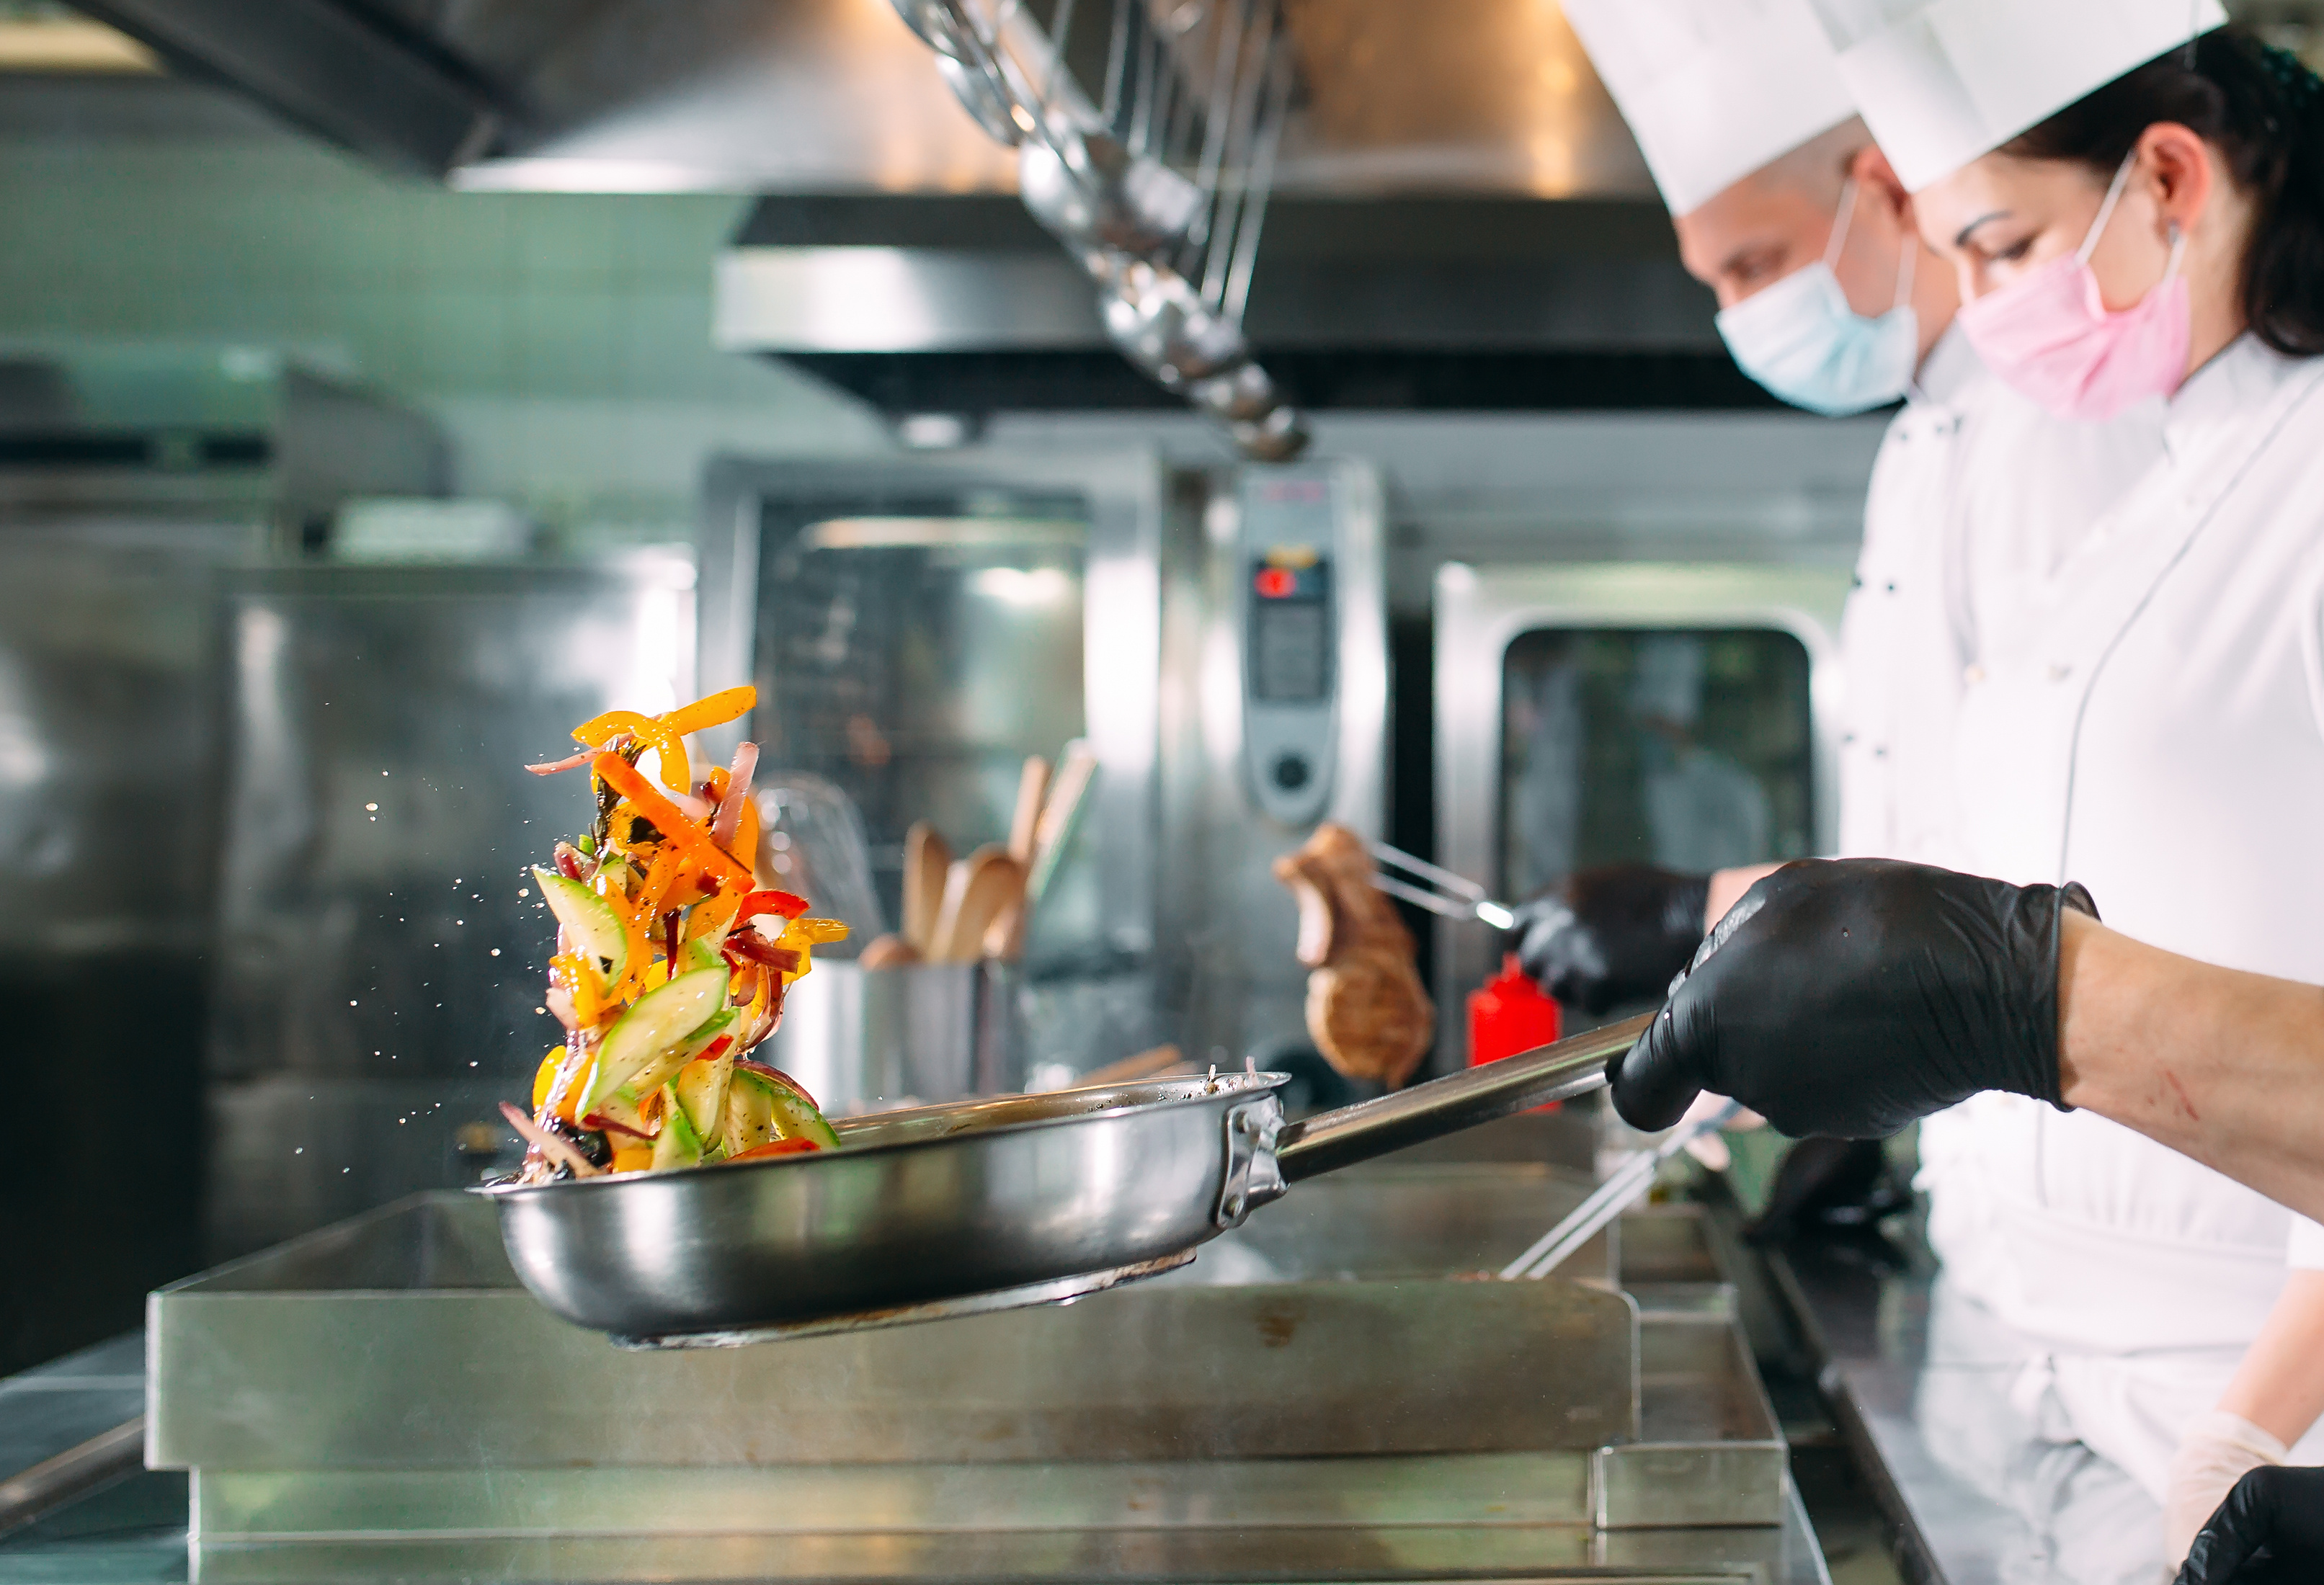 Top FDA Food Safety Compliance Concerns for Restaurants and Technology to Help